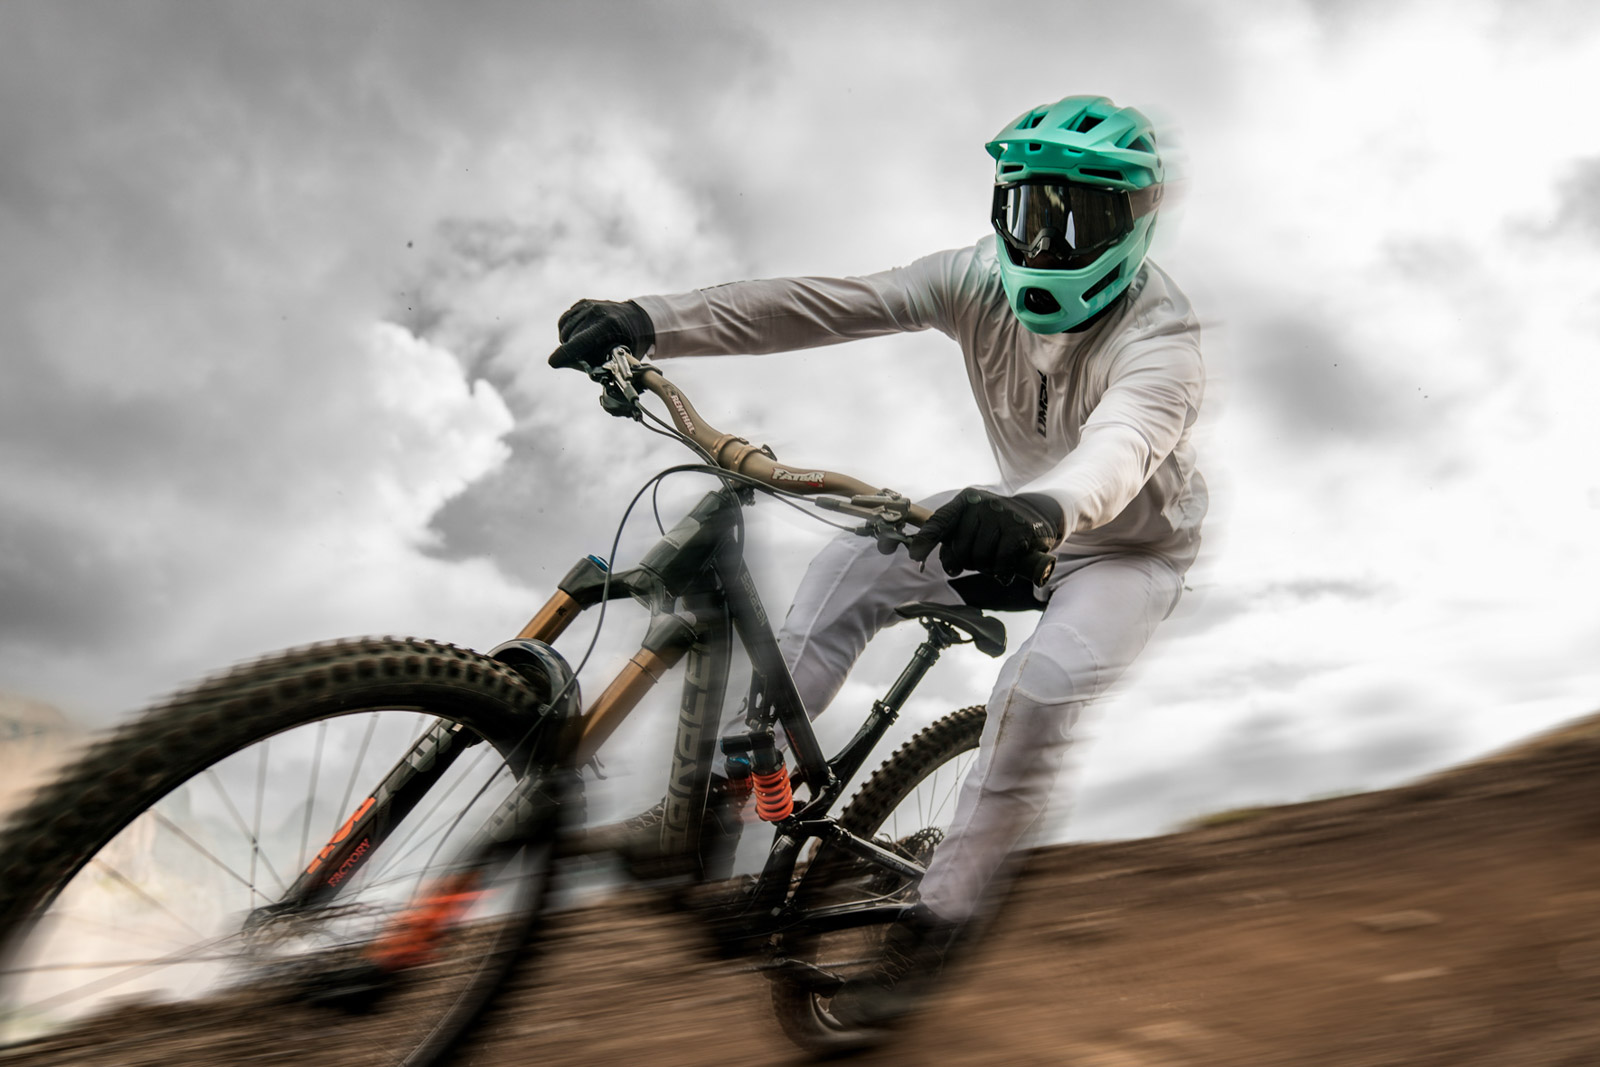 New Limar Livigno Helmet is a Very Lightweight Full-Face for Enduro or DH